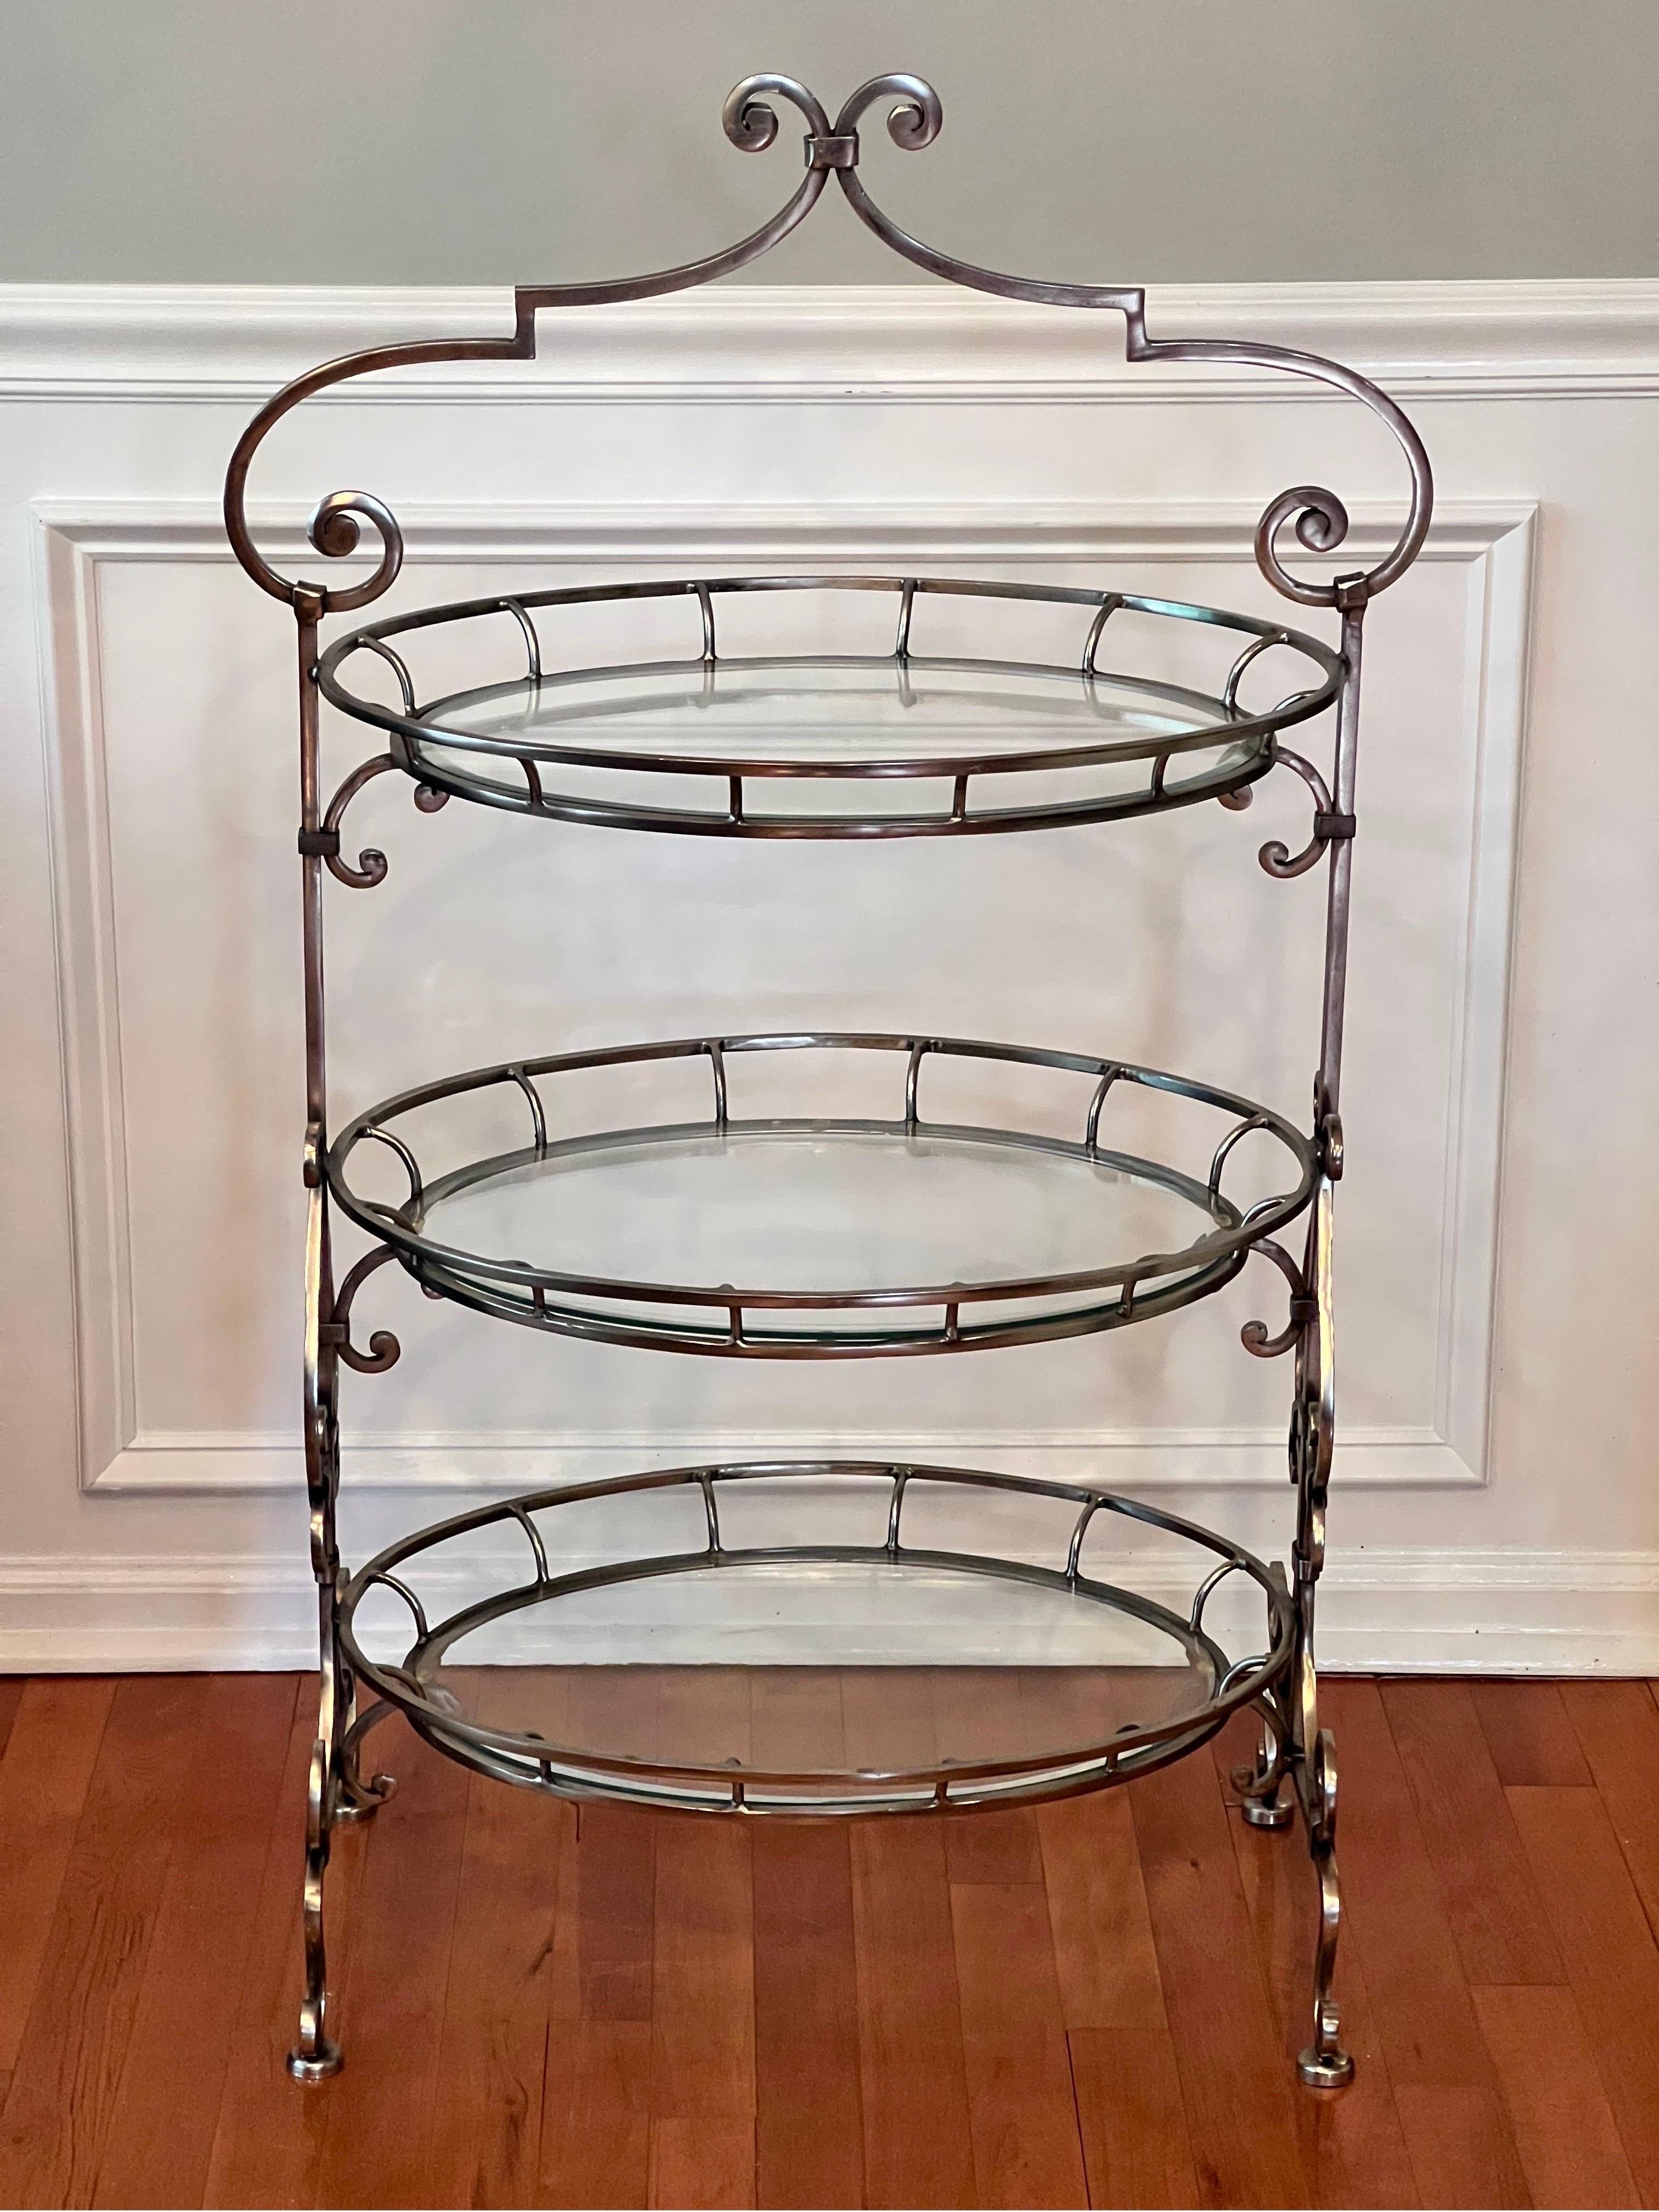 Elegant French style three tier patisserie stand with beveled glass. 

Perfect for serving desserts, the stand is adorned with graceful, silvered ornamental scrolling throughout. It is very sturdy with good weight and in very good condition. 